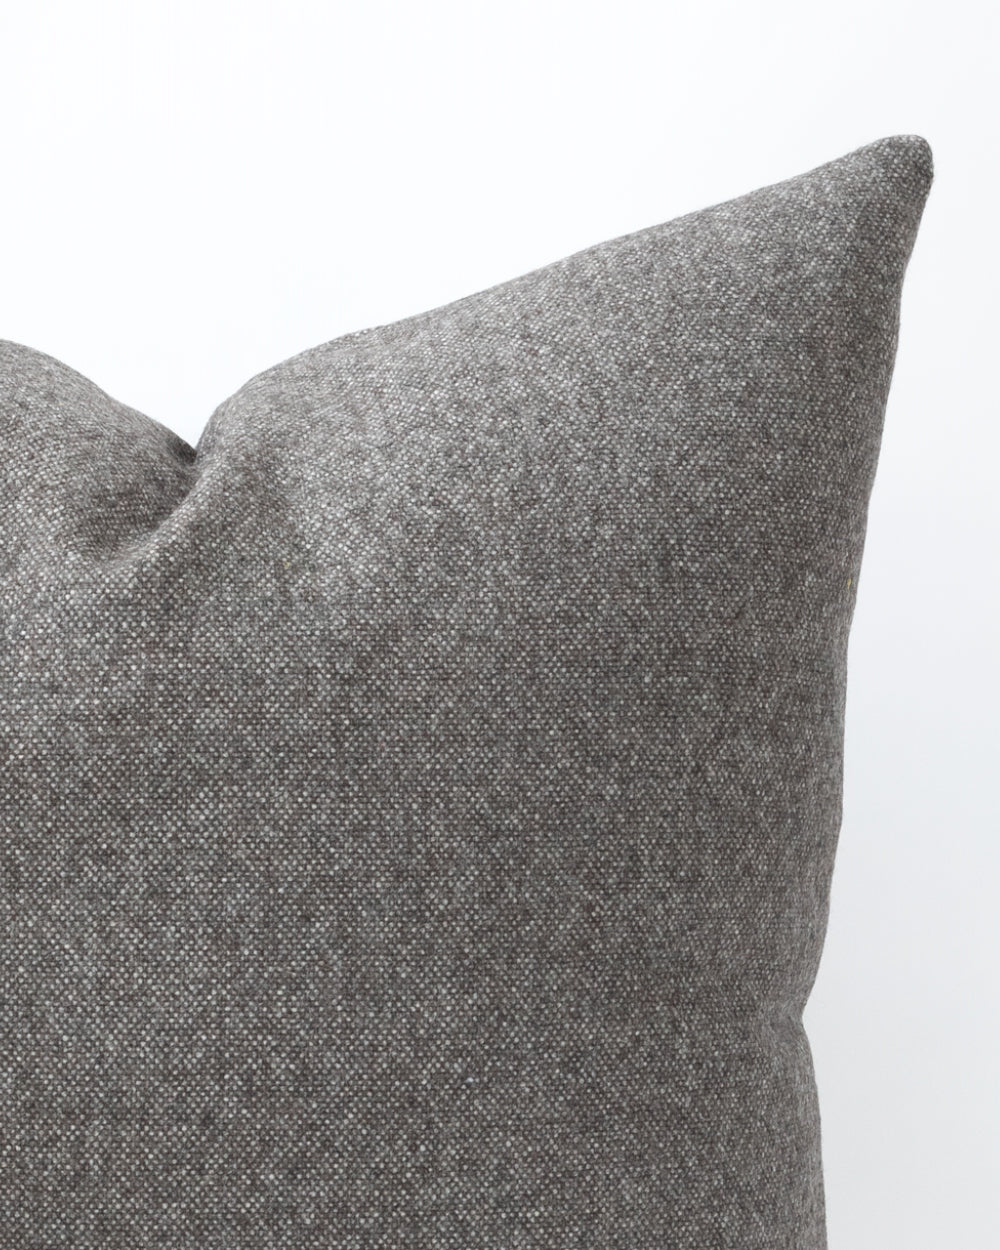 Detailed close up of charcoal grey pillow.